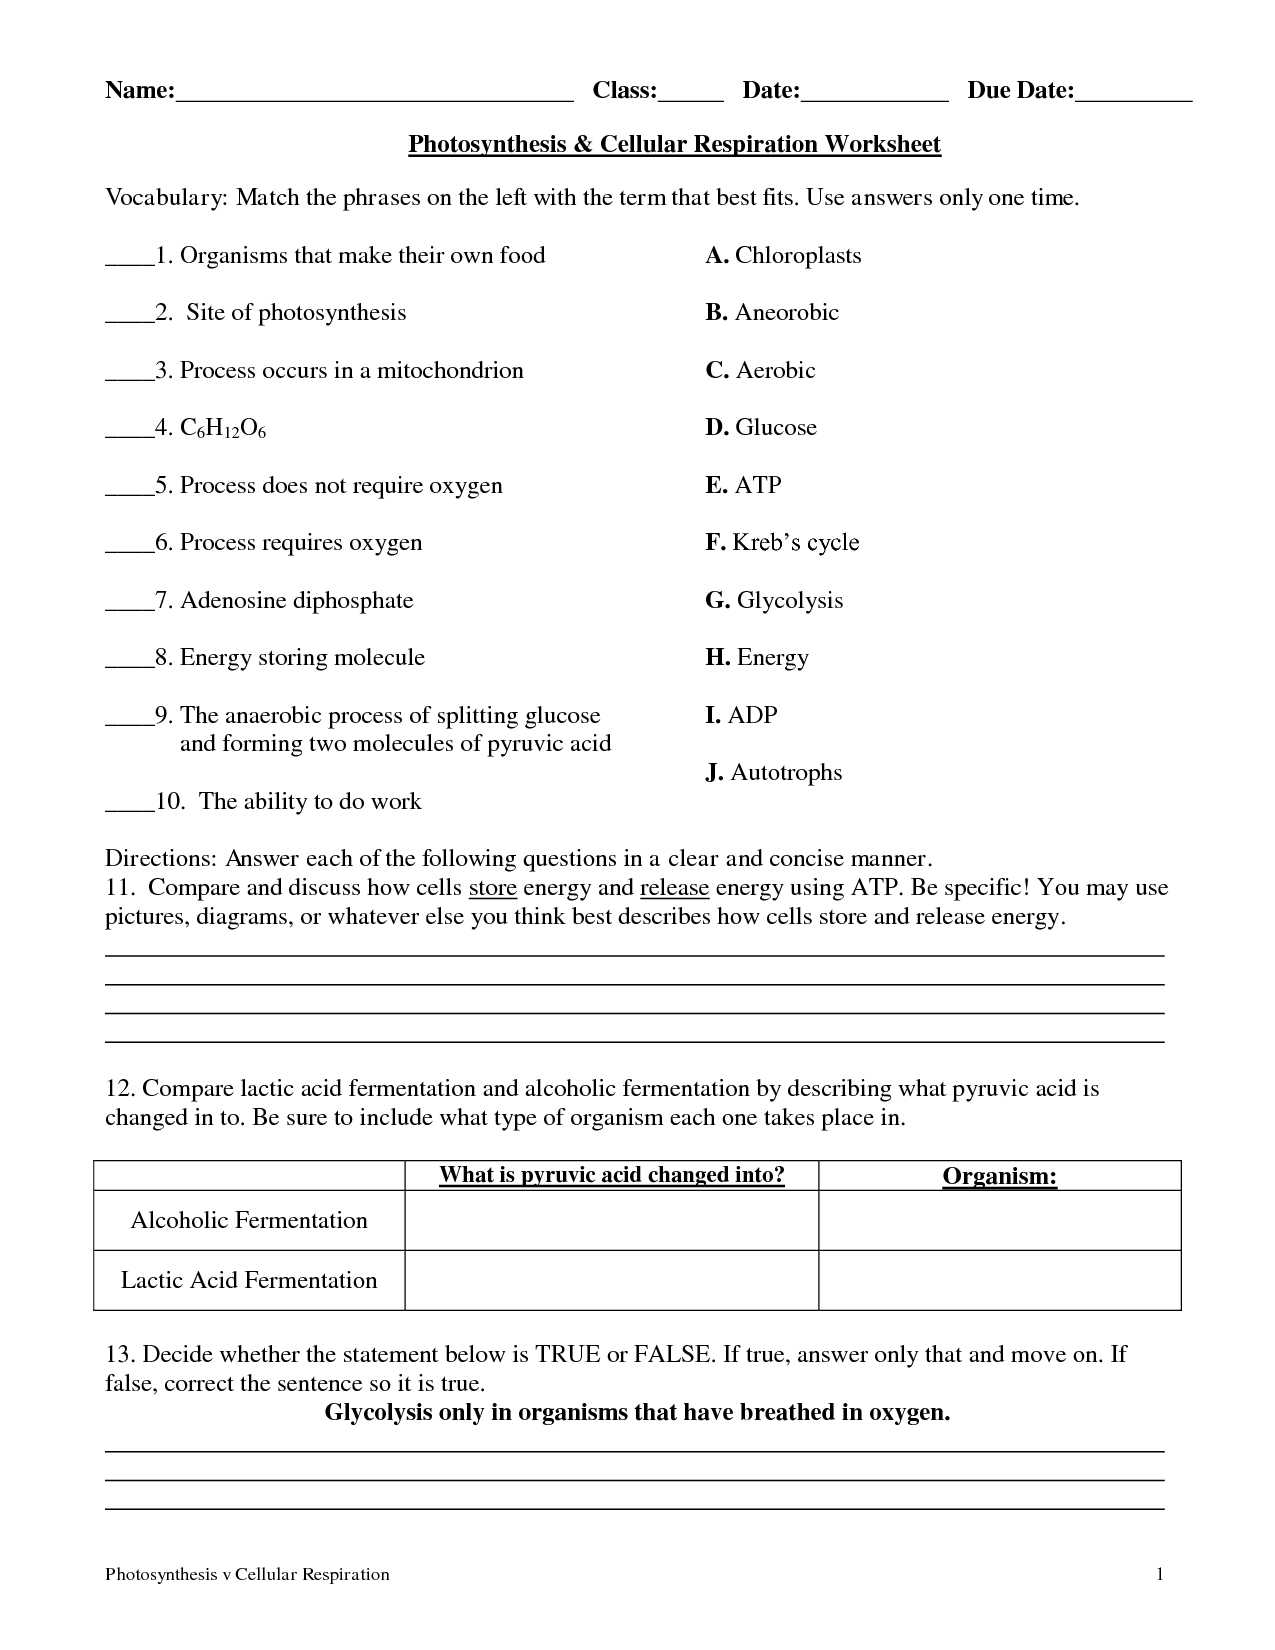 Dna Review Worksheet together with Photosynthesis Worksheet Google Search